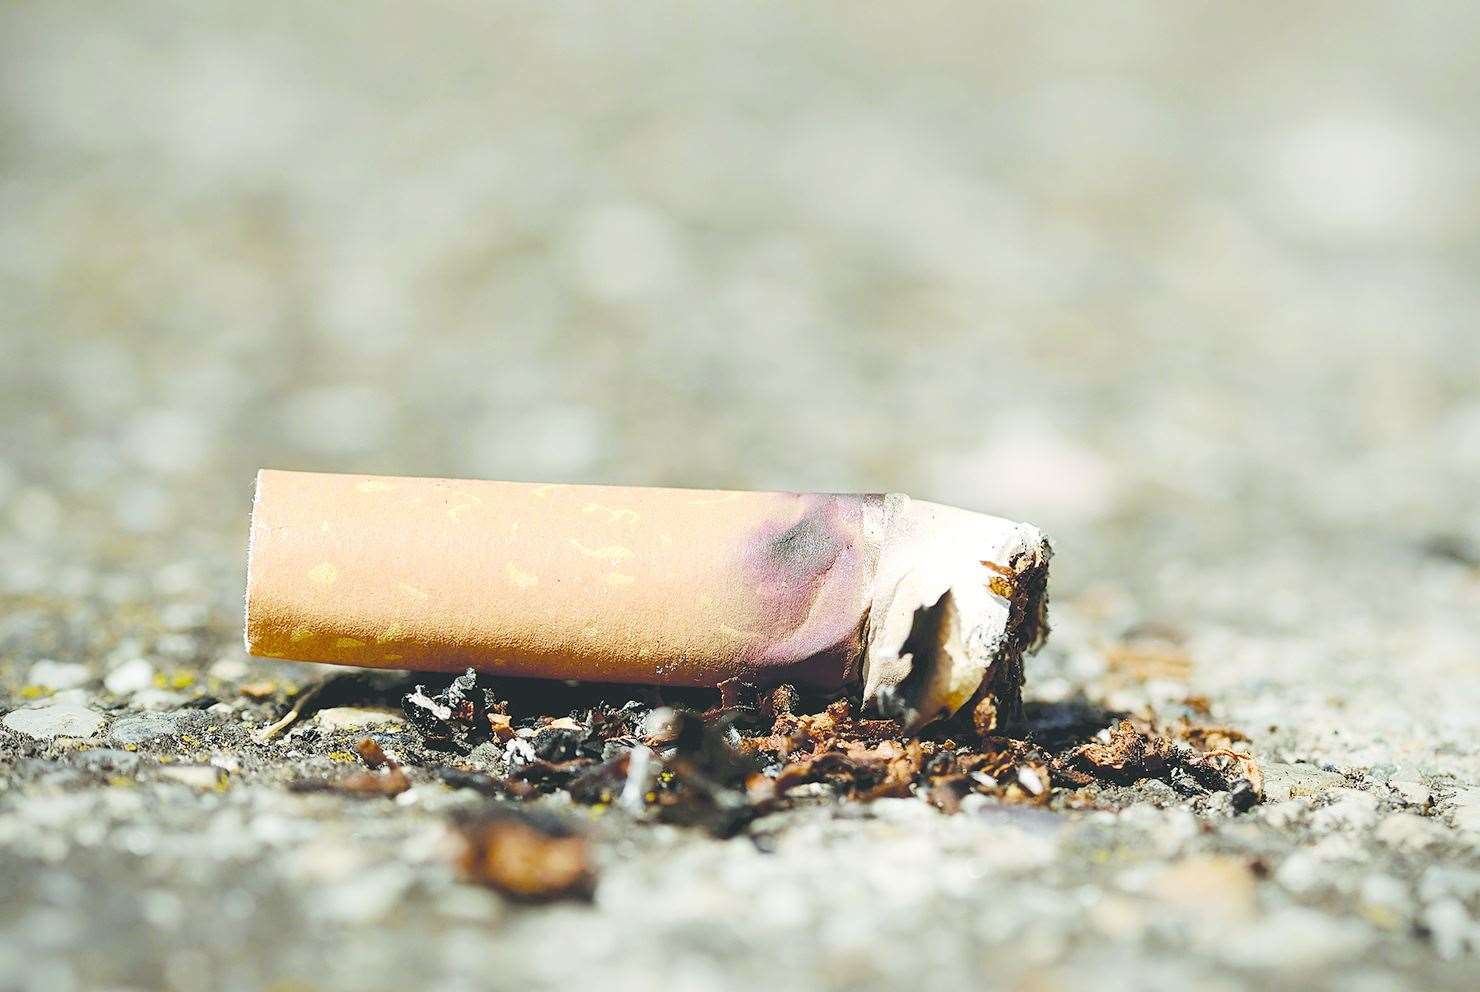 Gravesham council has prosecuted a man after he was spotted throwing a cigarette butt on the floor